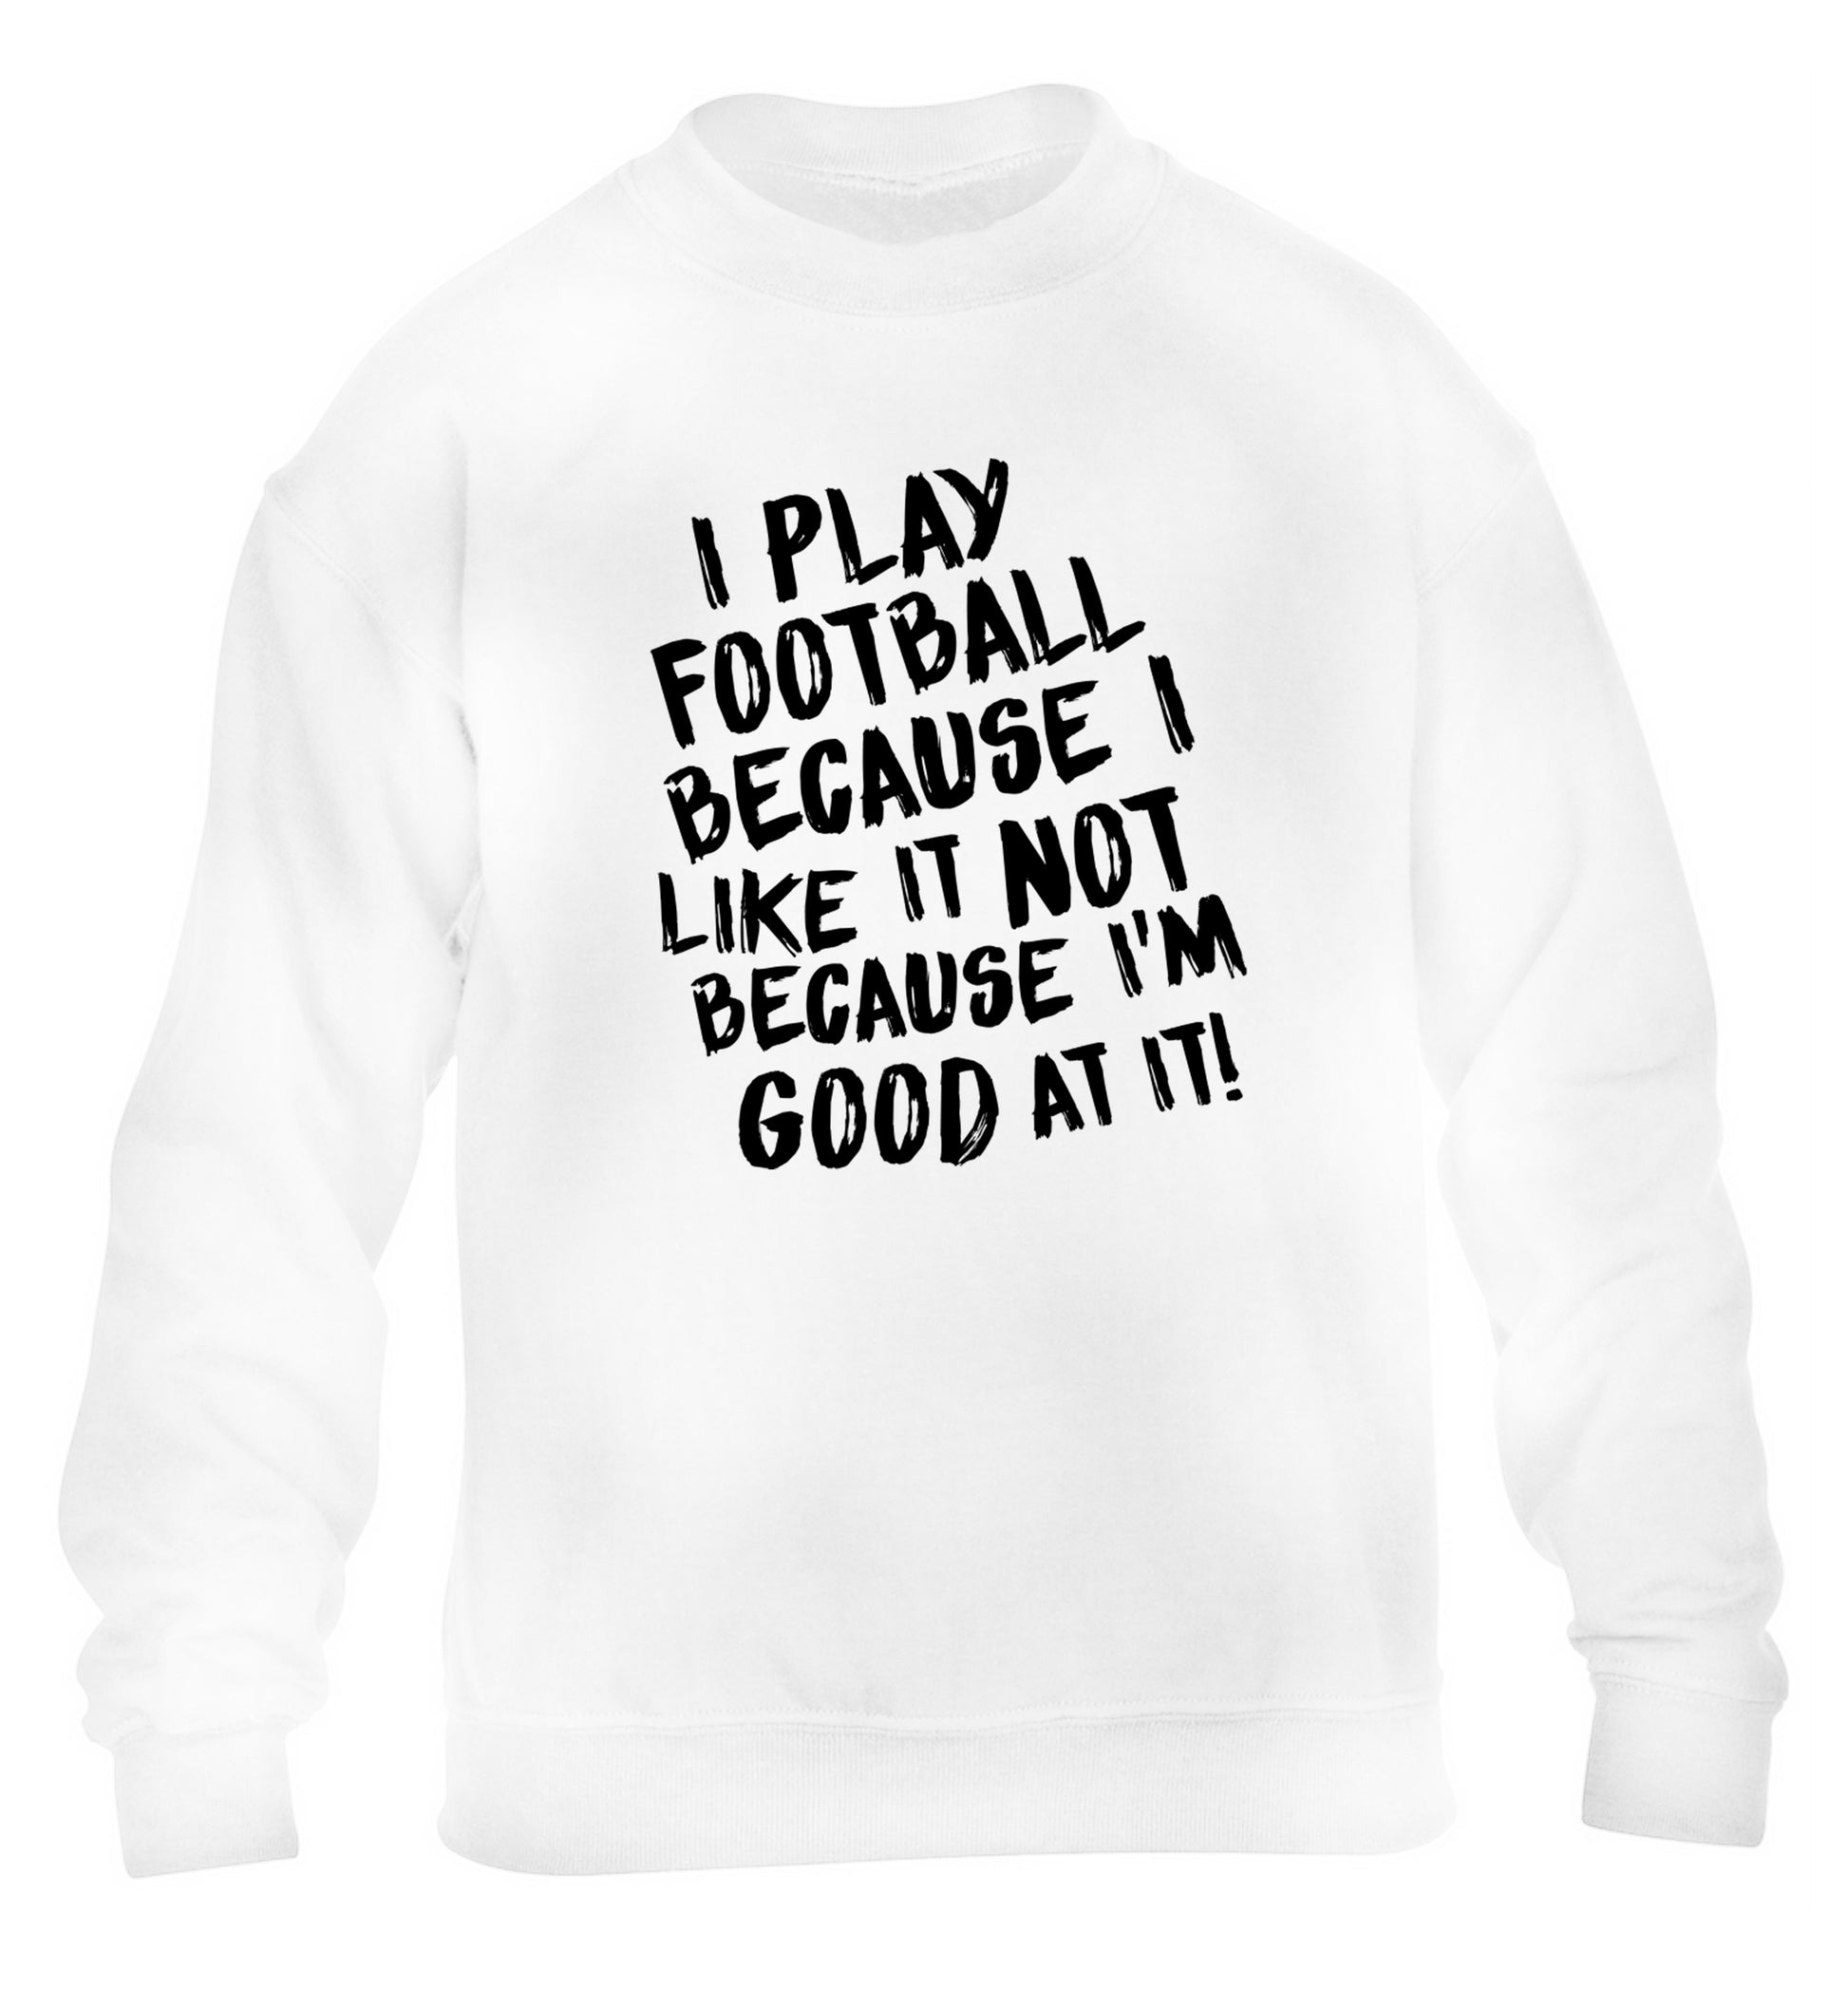 I play football because I like it not because I'm good at it children's white sweater 12-14 Years